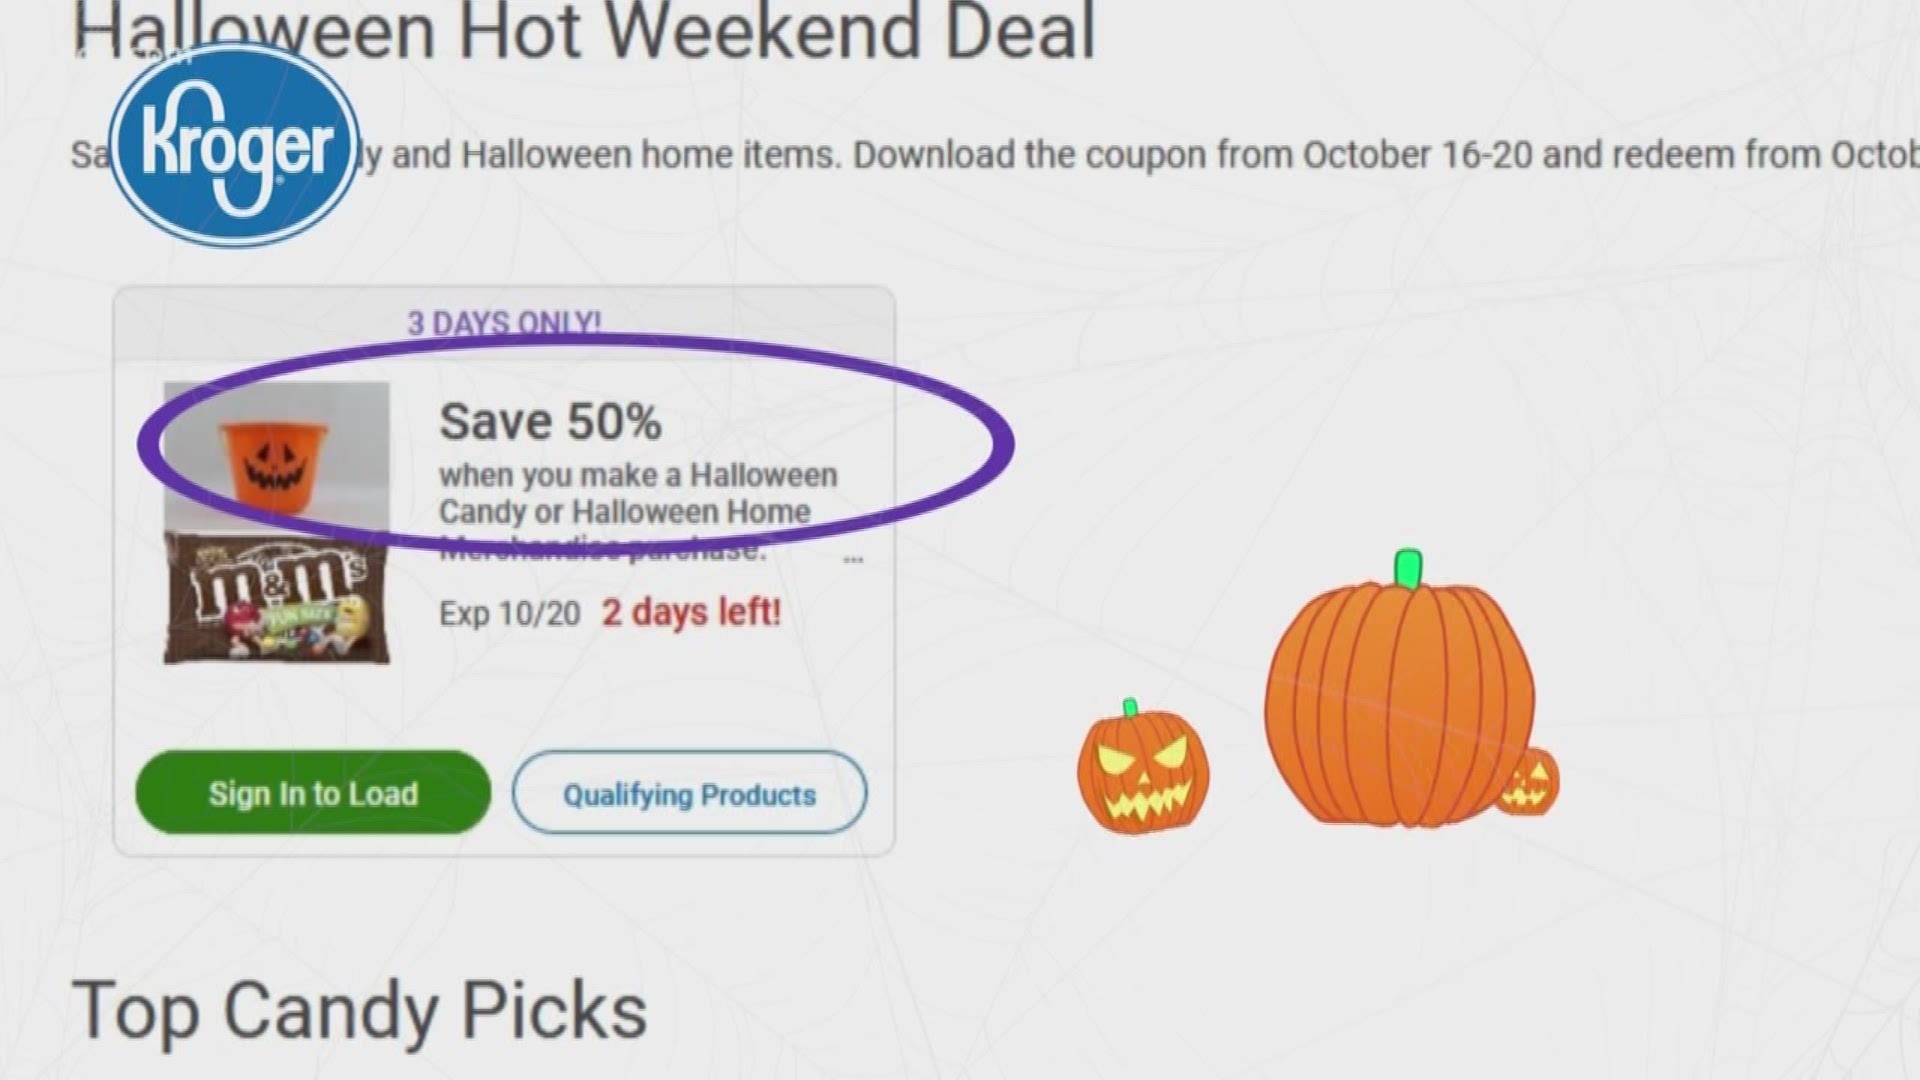 Here are some deals you can check out this weekend for Halloween.